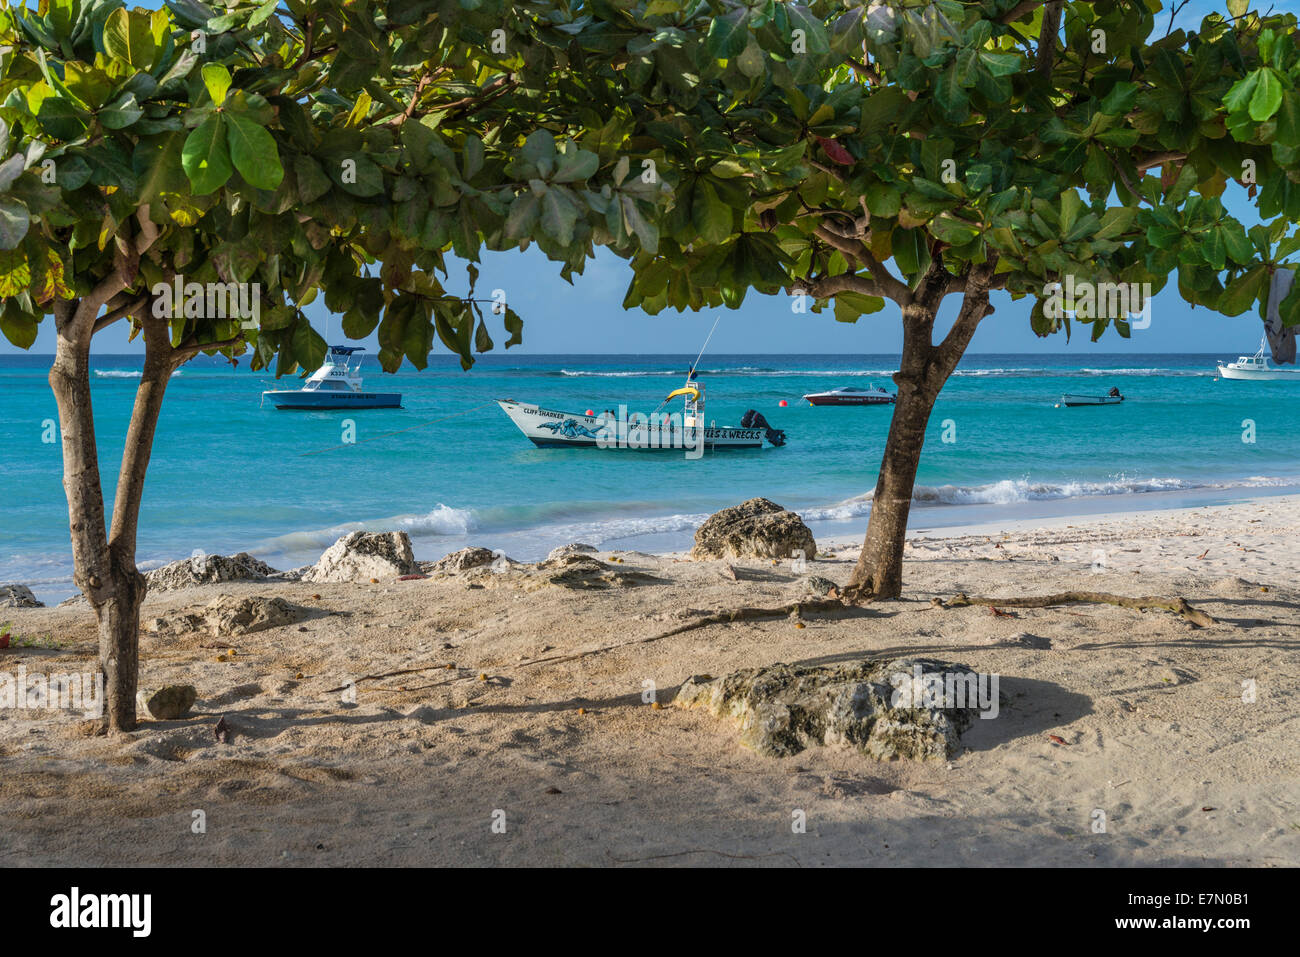 Boats moored off Worthing Beach, Barbados Stock Photo